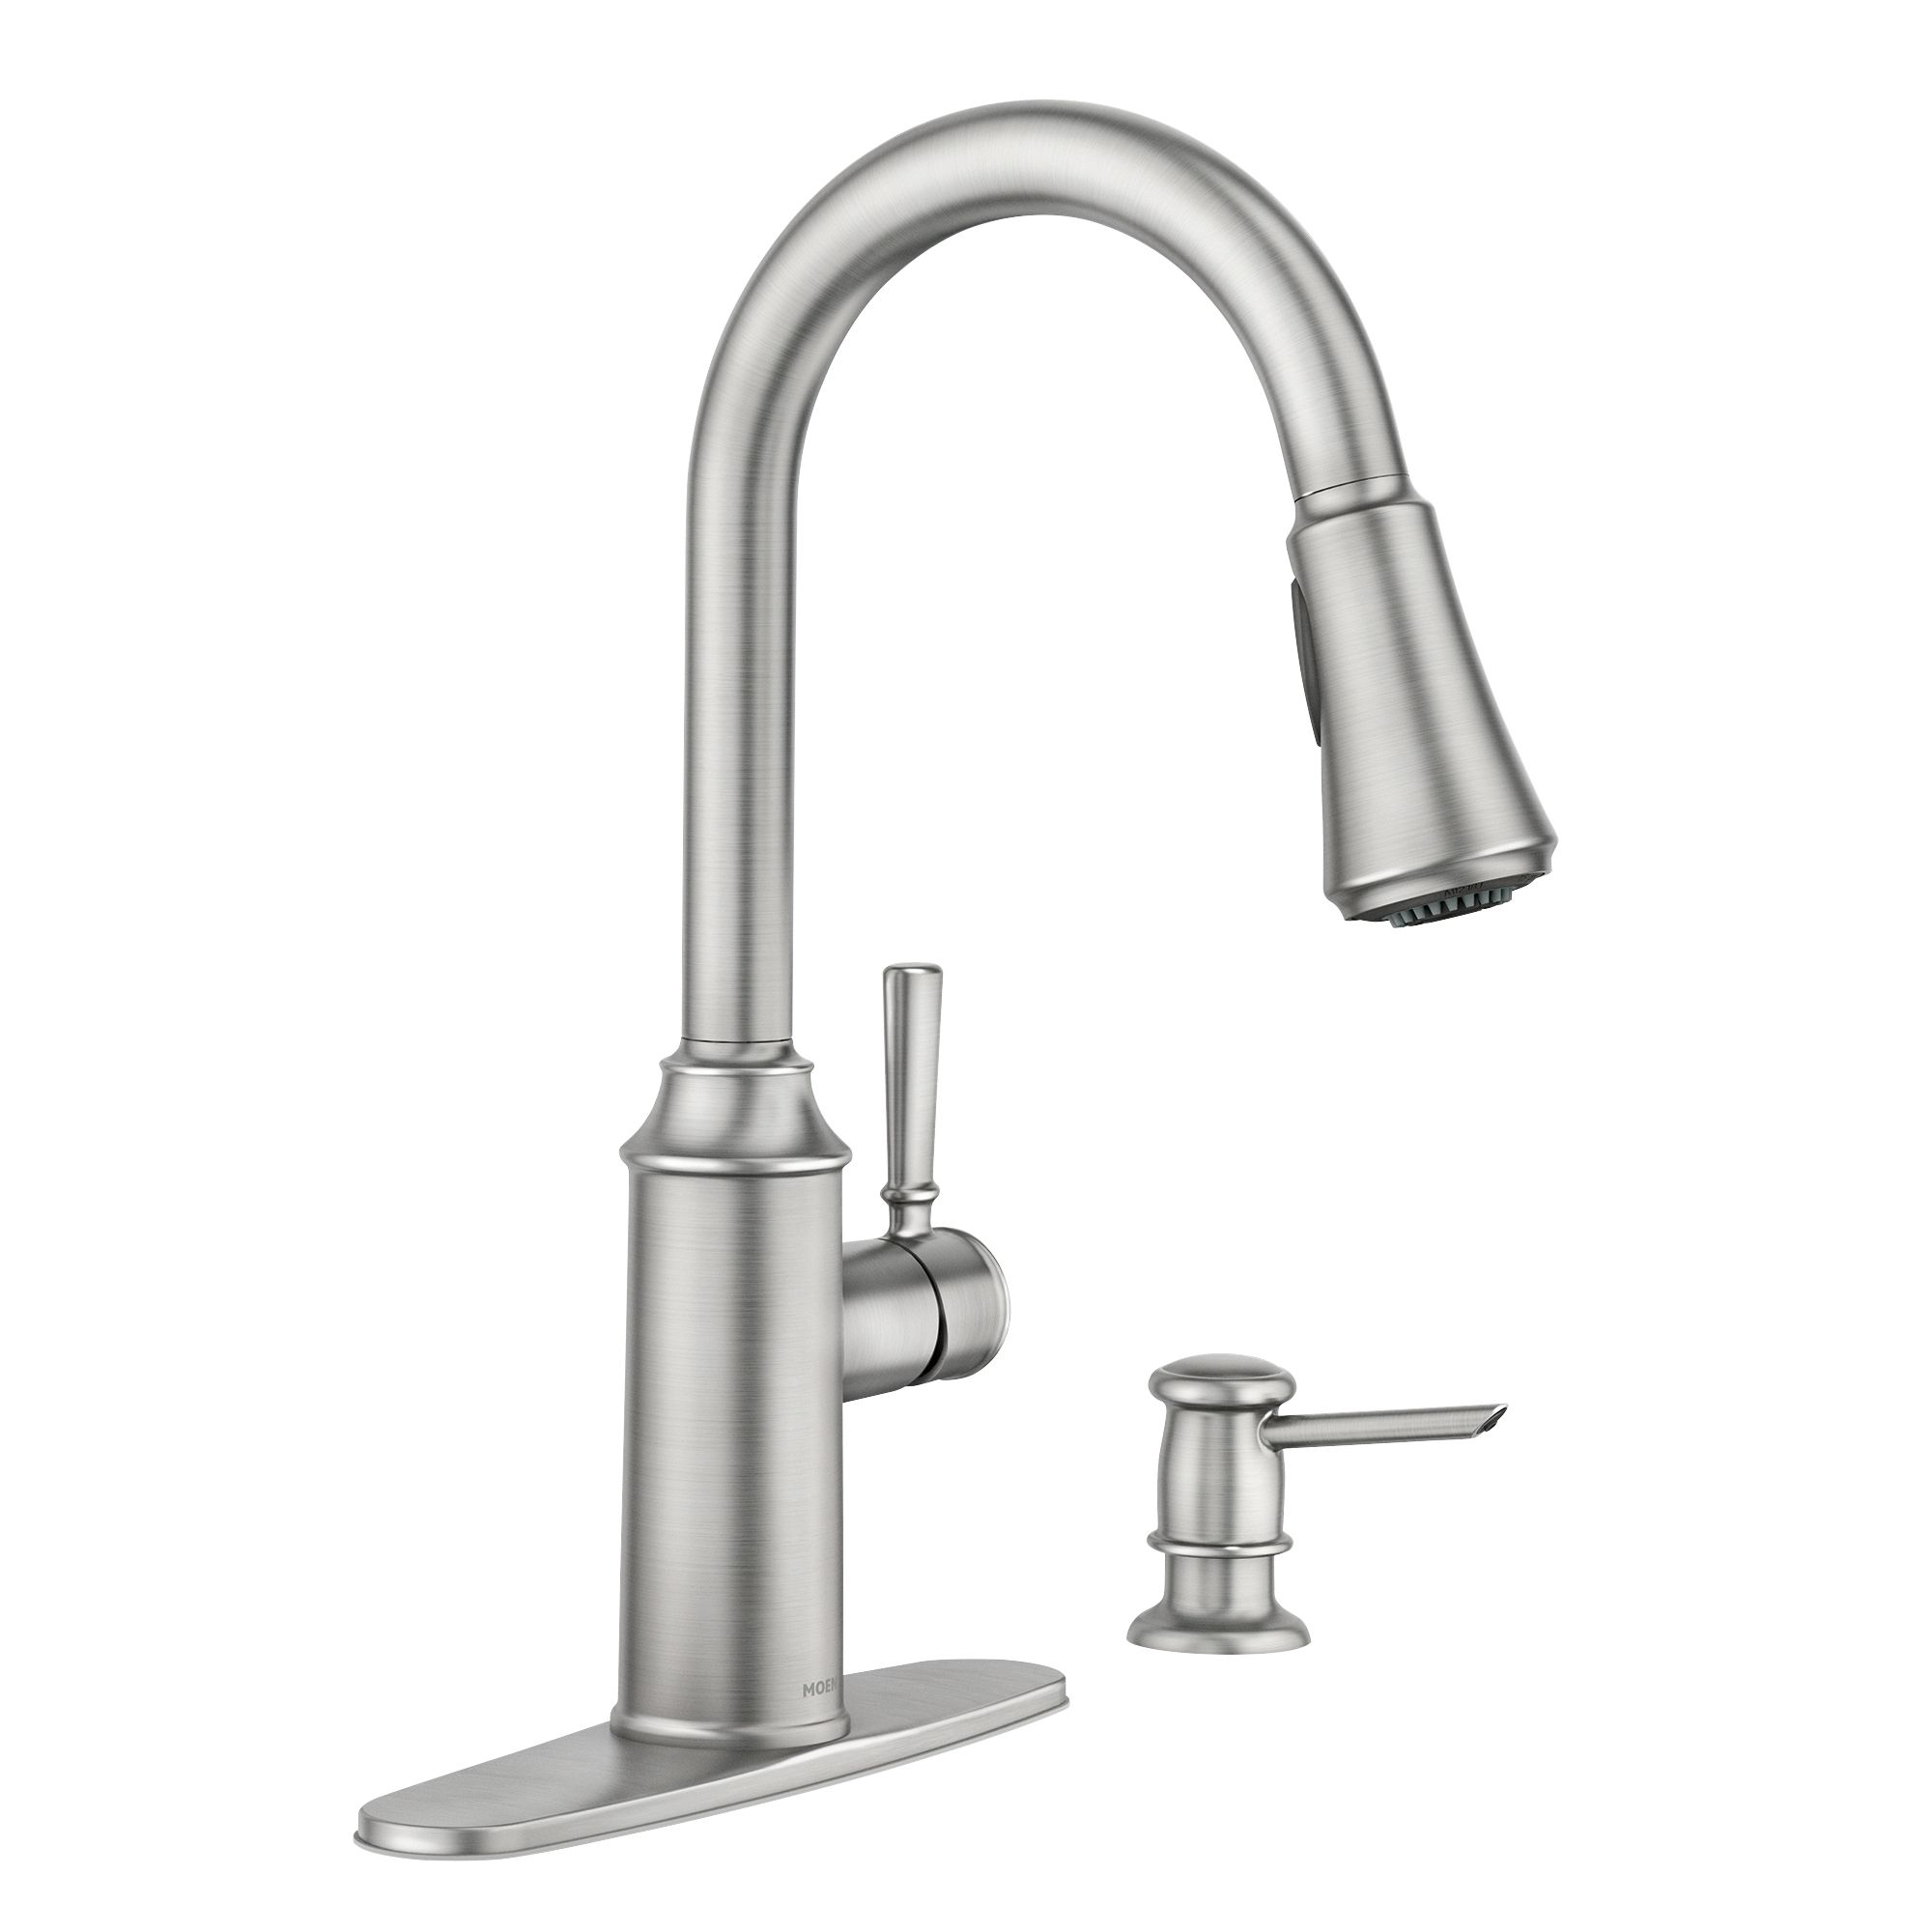 Moen Zabelle One-Handle Pulldown Kitchen Faucet with Soap Dispenser